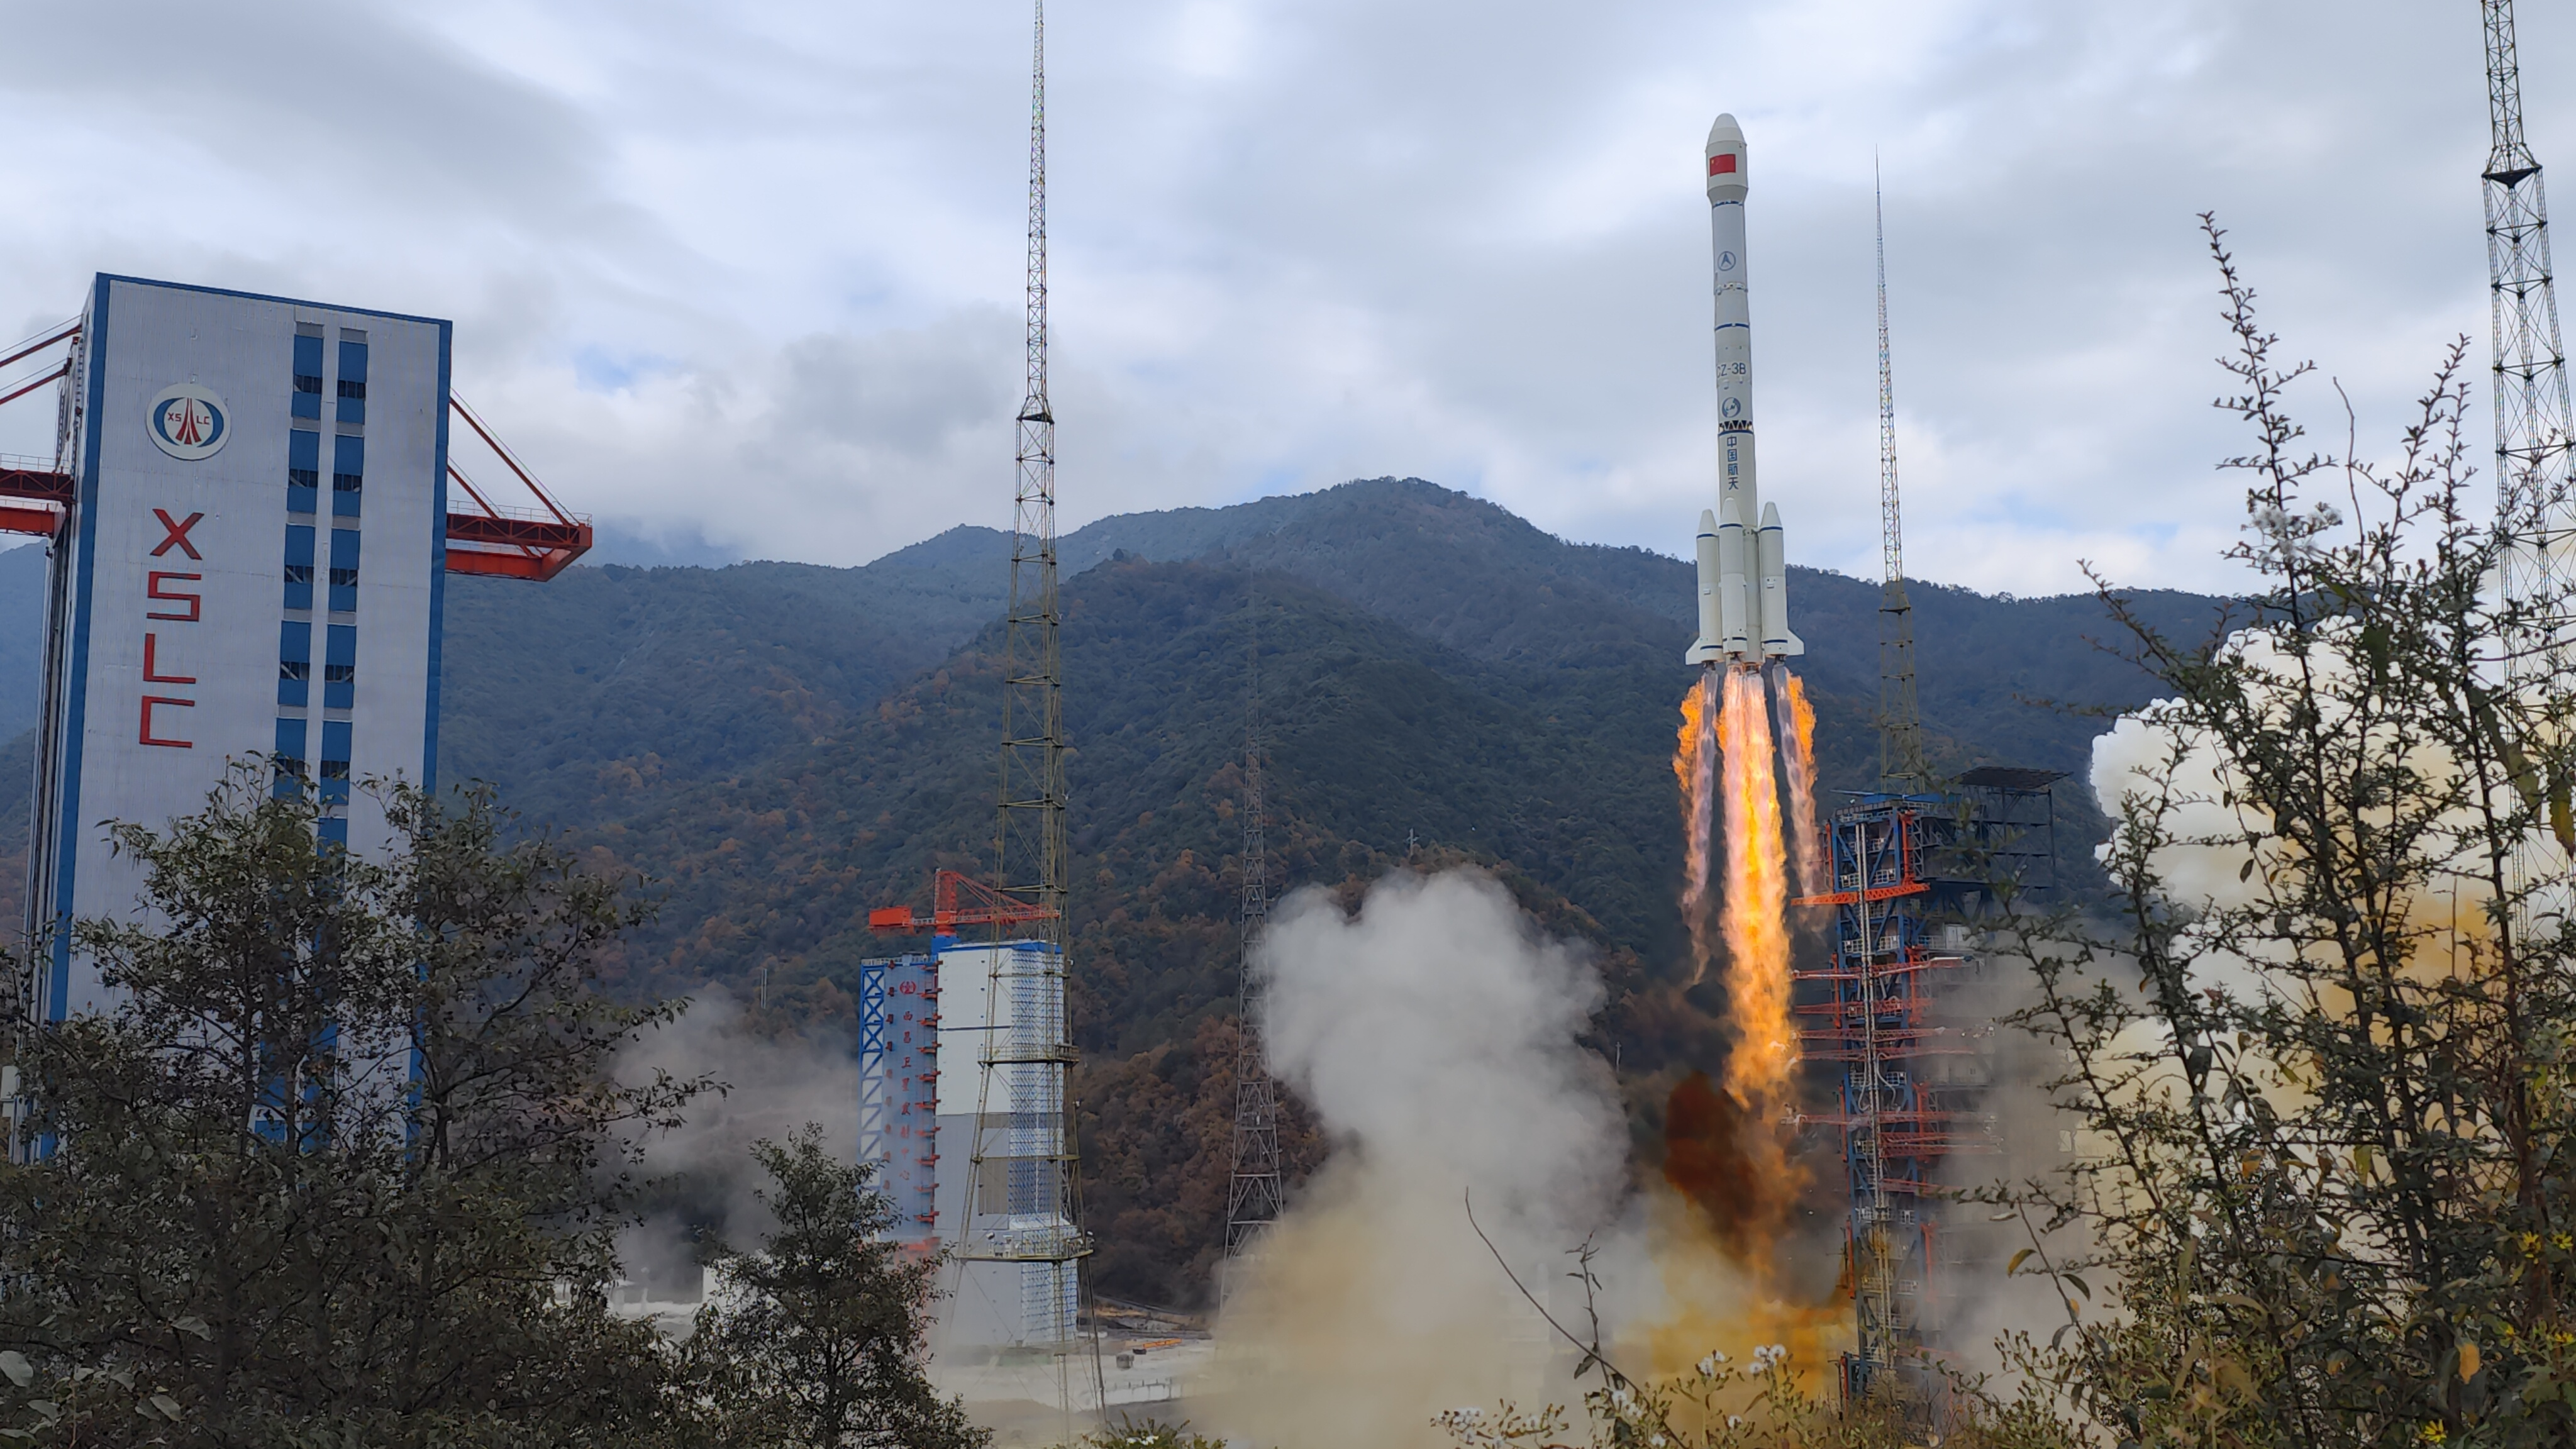 The Shiyan 10-02 satellite is launched by a Long March 3B carrier rocket from the Xichang Satellite Launch Center in southwest China's Sichuan Province, December 29, 2022. /Hu Xujie